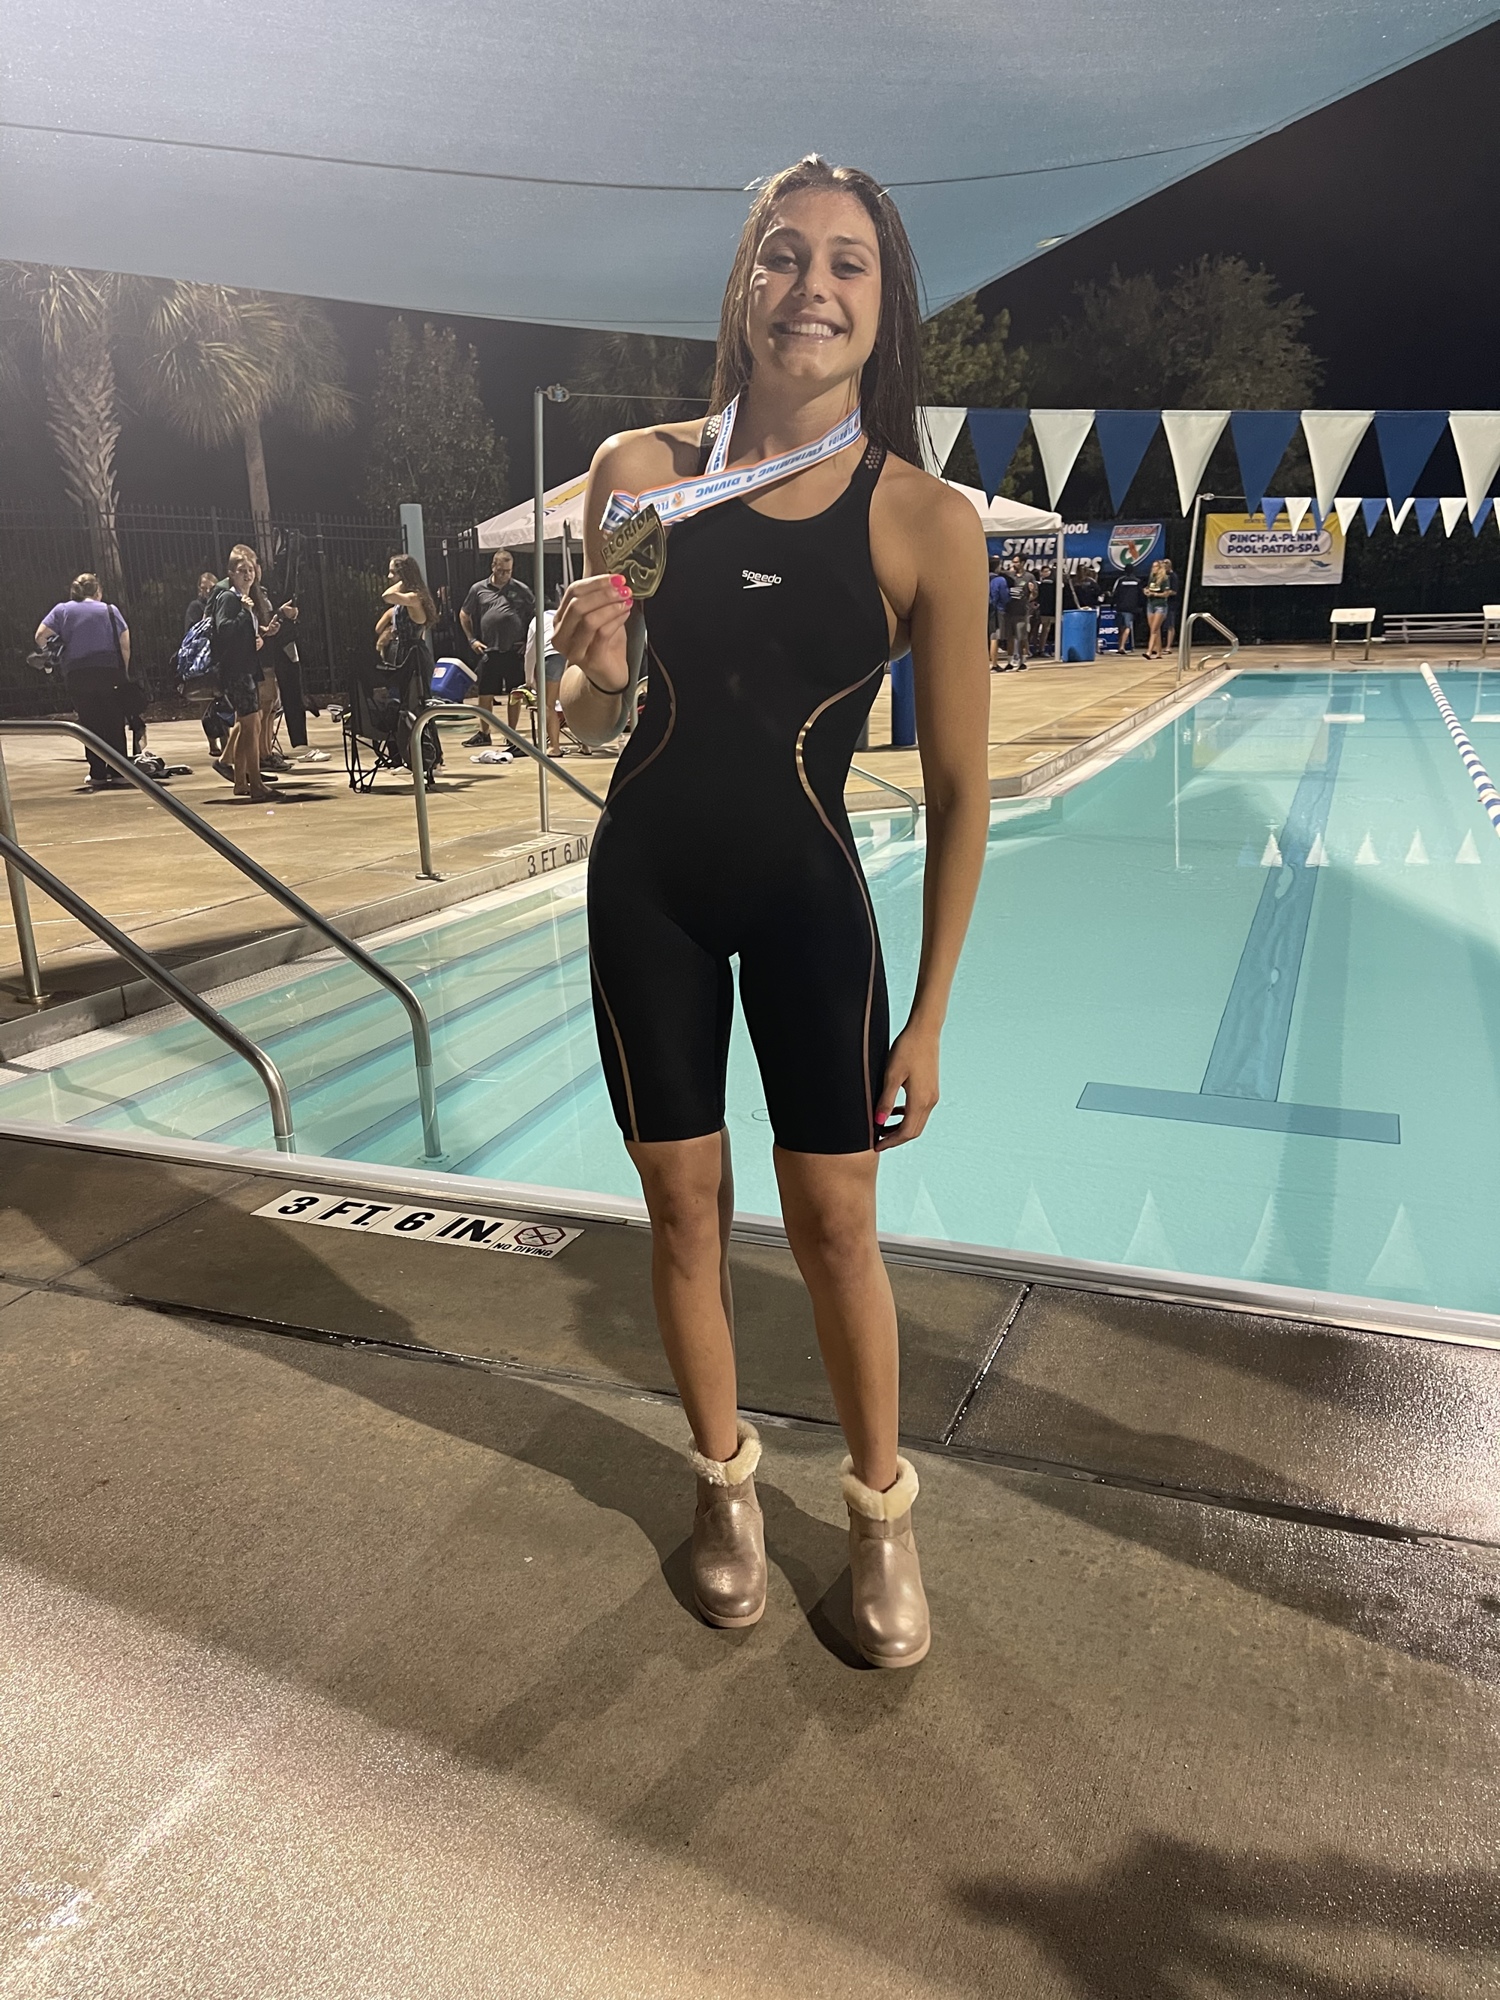 3. Riverview's Gracie Weyant won two gold medals at the 2021 FHSAA Class 4A state swimming championship. Courtesy photo.